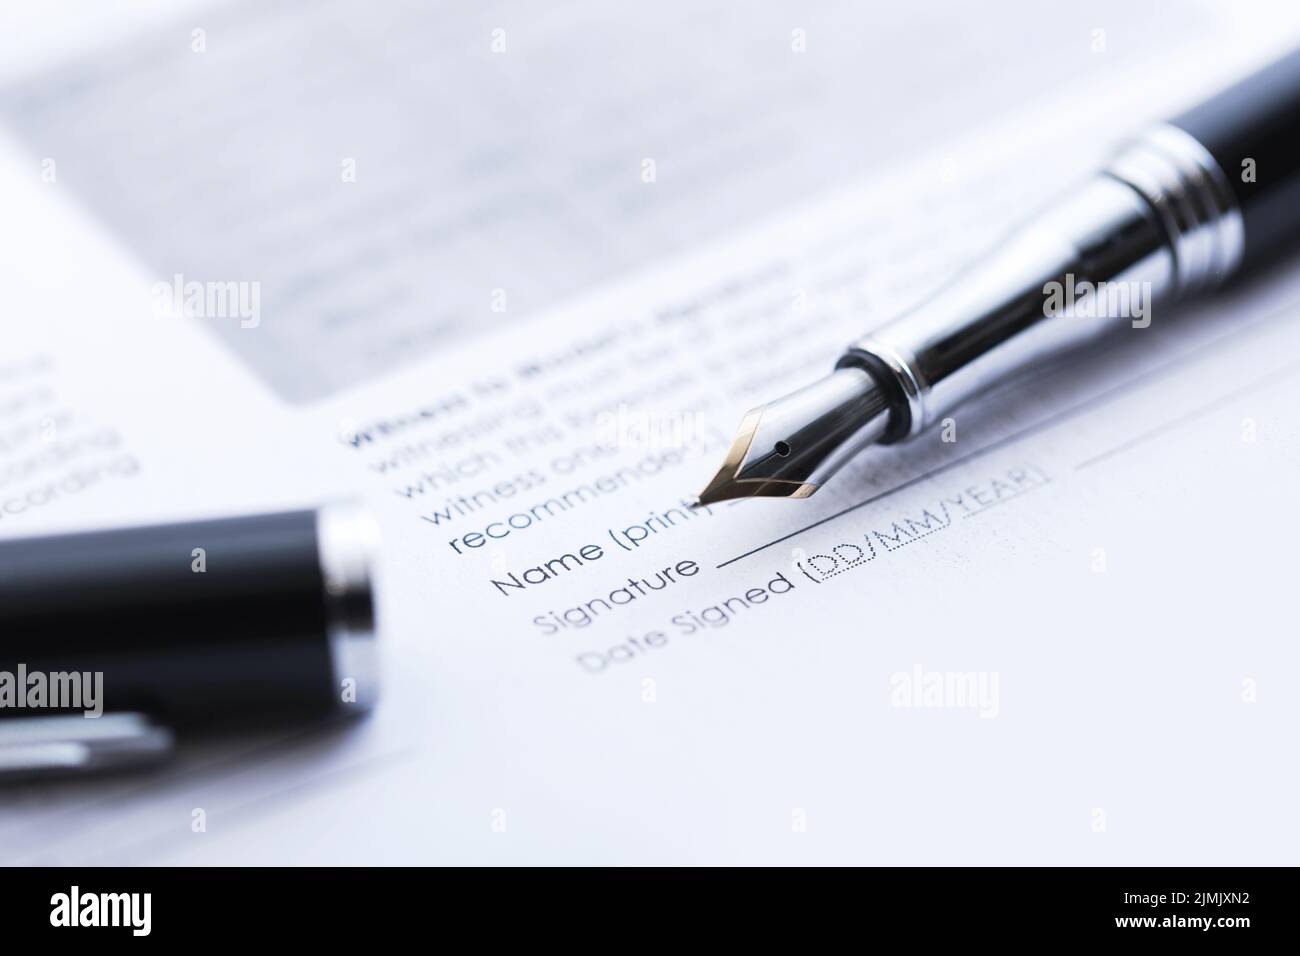 Signing the business contract. Fountain pen and document. Stock Photo